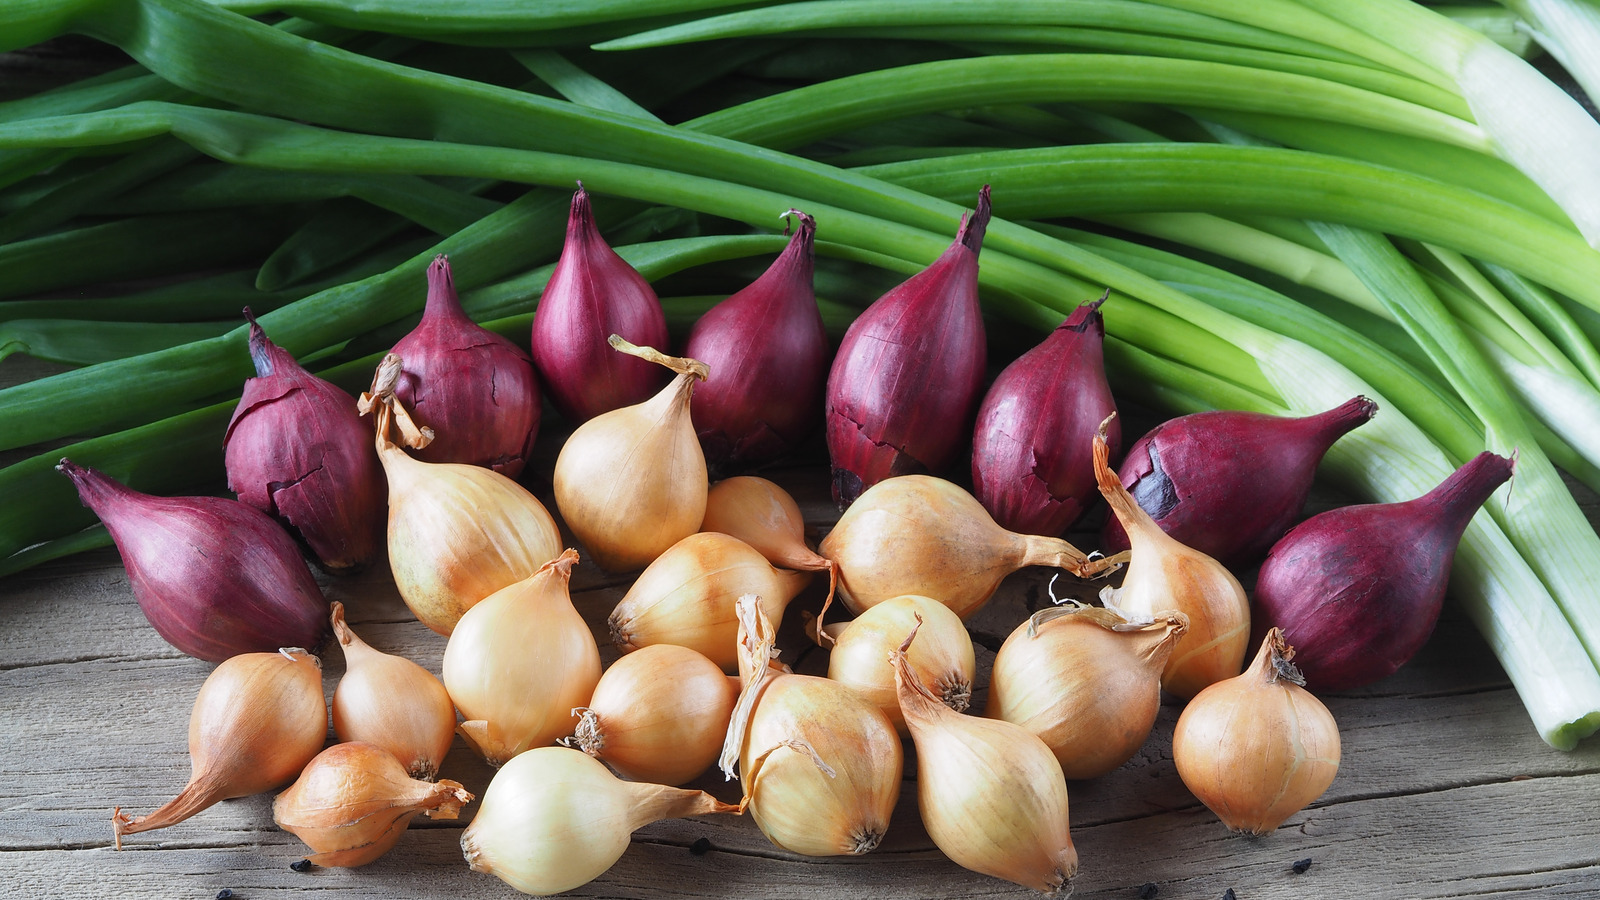 Shallots Vs. Green Onions What's The Difference